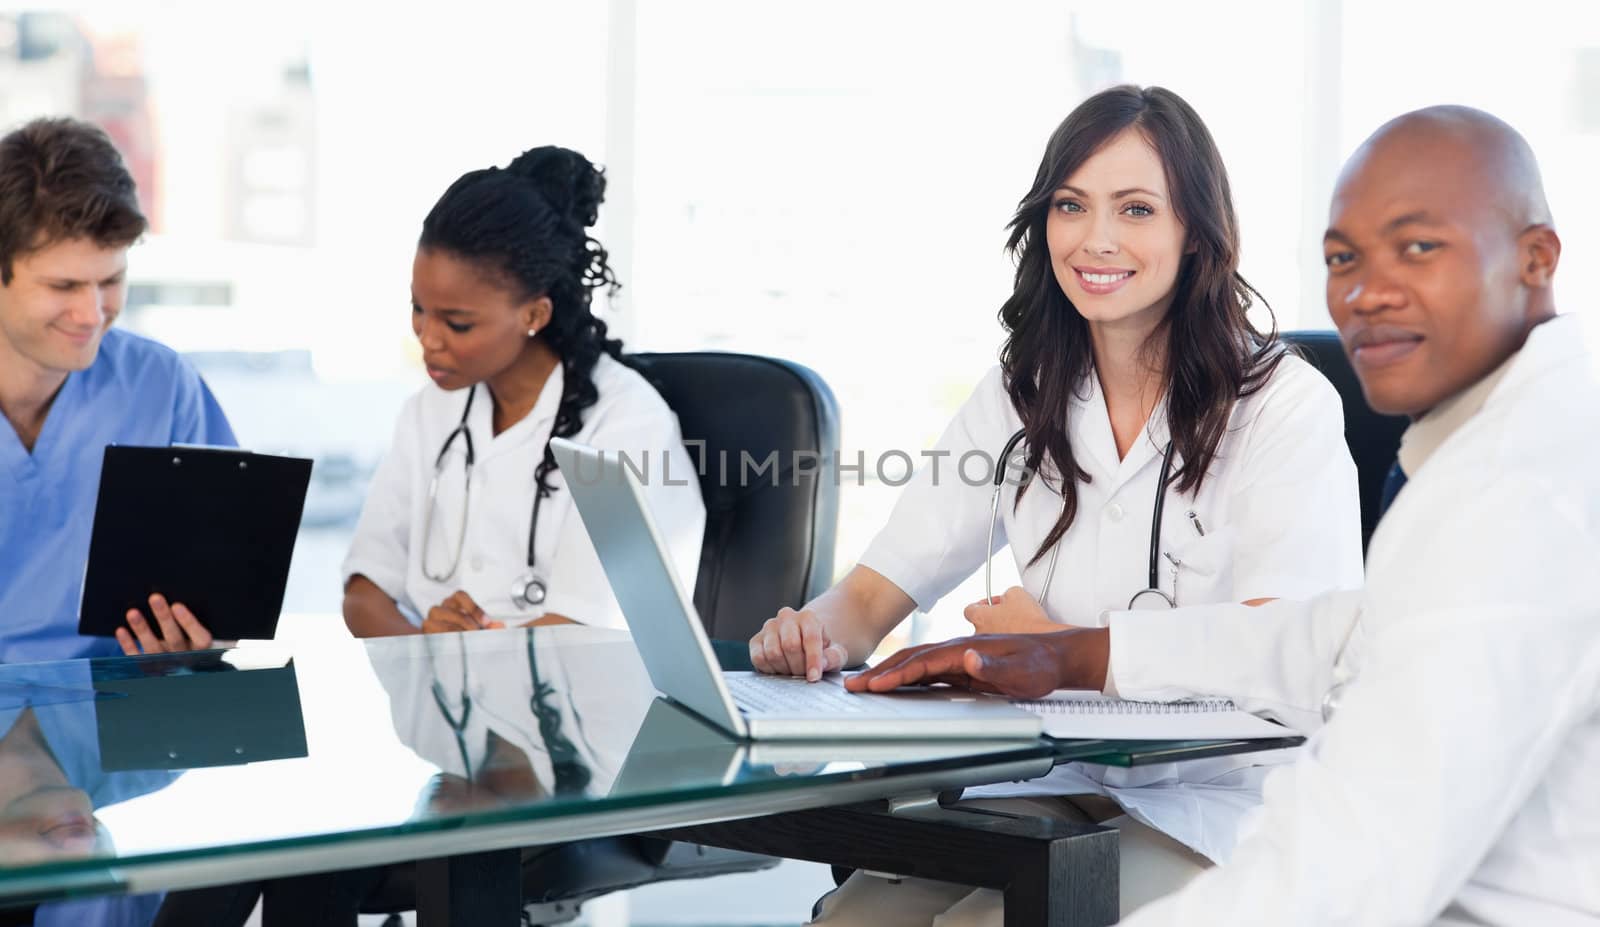 Members of a medical tean looking at the camera while working on a laptop